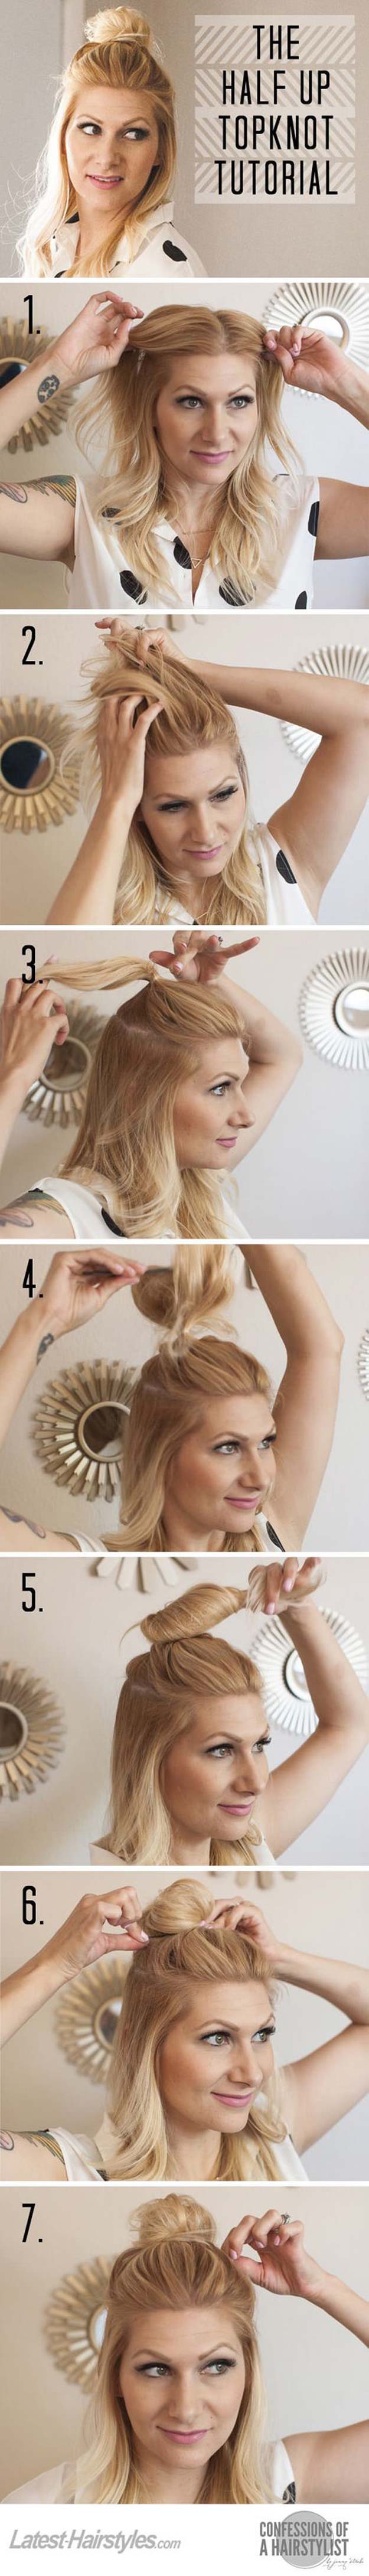 Cool and Easy DIY Hairstyles - The Half Up Top Knot - Quick and Easy Ideas for Back to School Styles for Medium, Short and Long Hair - Fun Tips and Best Step by Step Tutorials for Teens, Prom, Weddings, Special Occasions and Work. Up dos, Braids, Top Knots and Buns, Super Summer Looks #hairstyles #hair #teens #easyhairstyles #diy #beauty